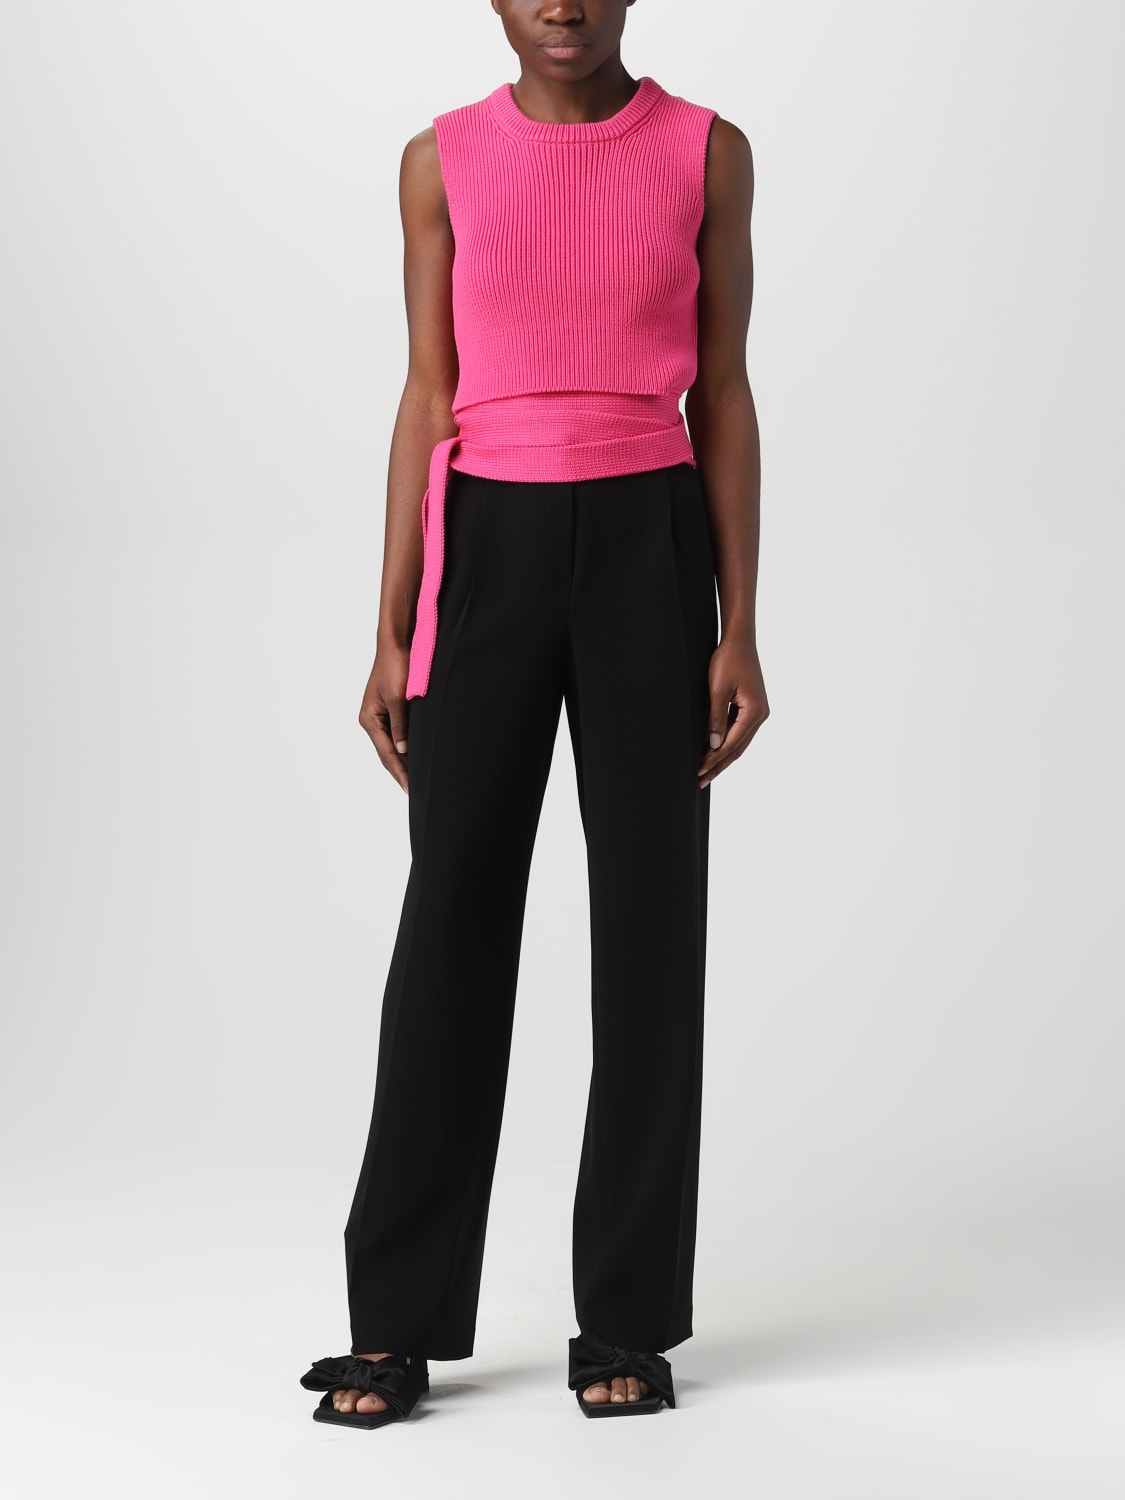 High-rise wide-leg pants in pink - RED Valentino